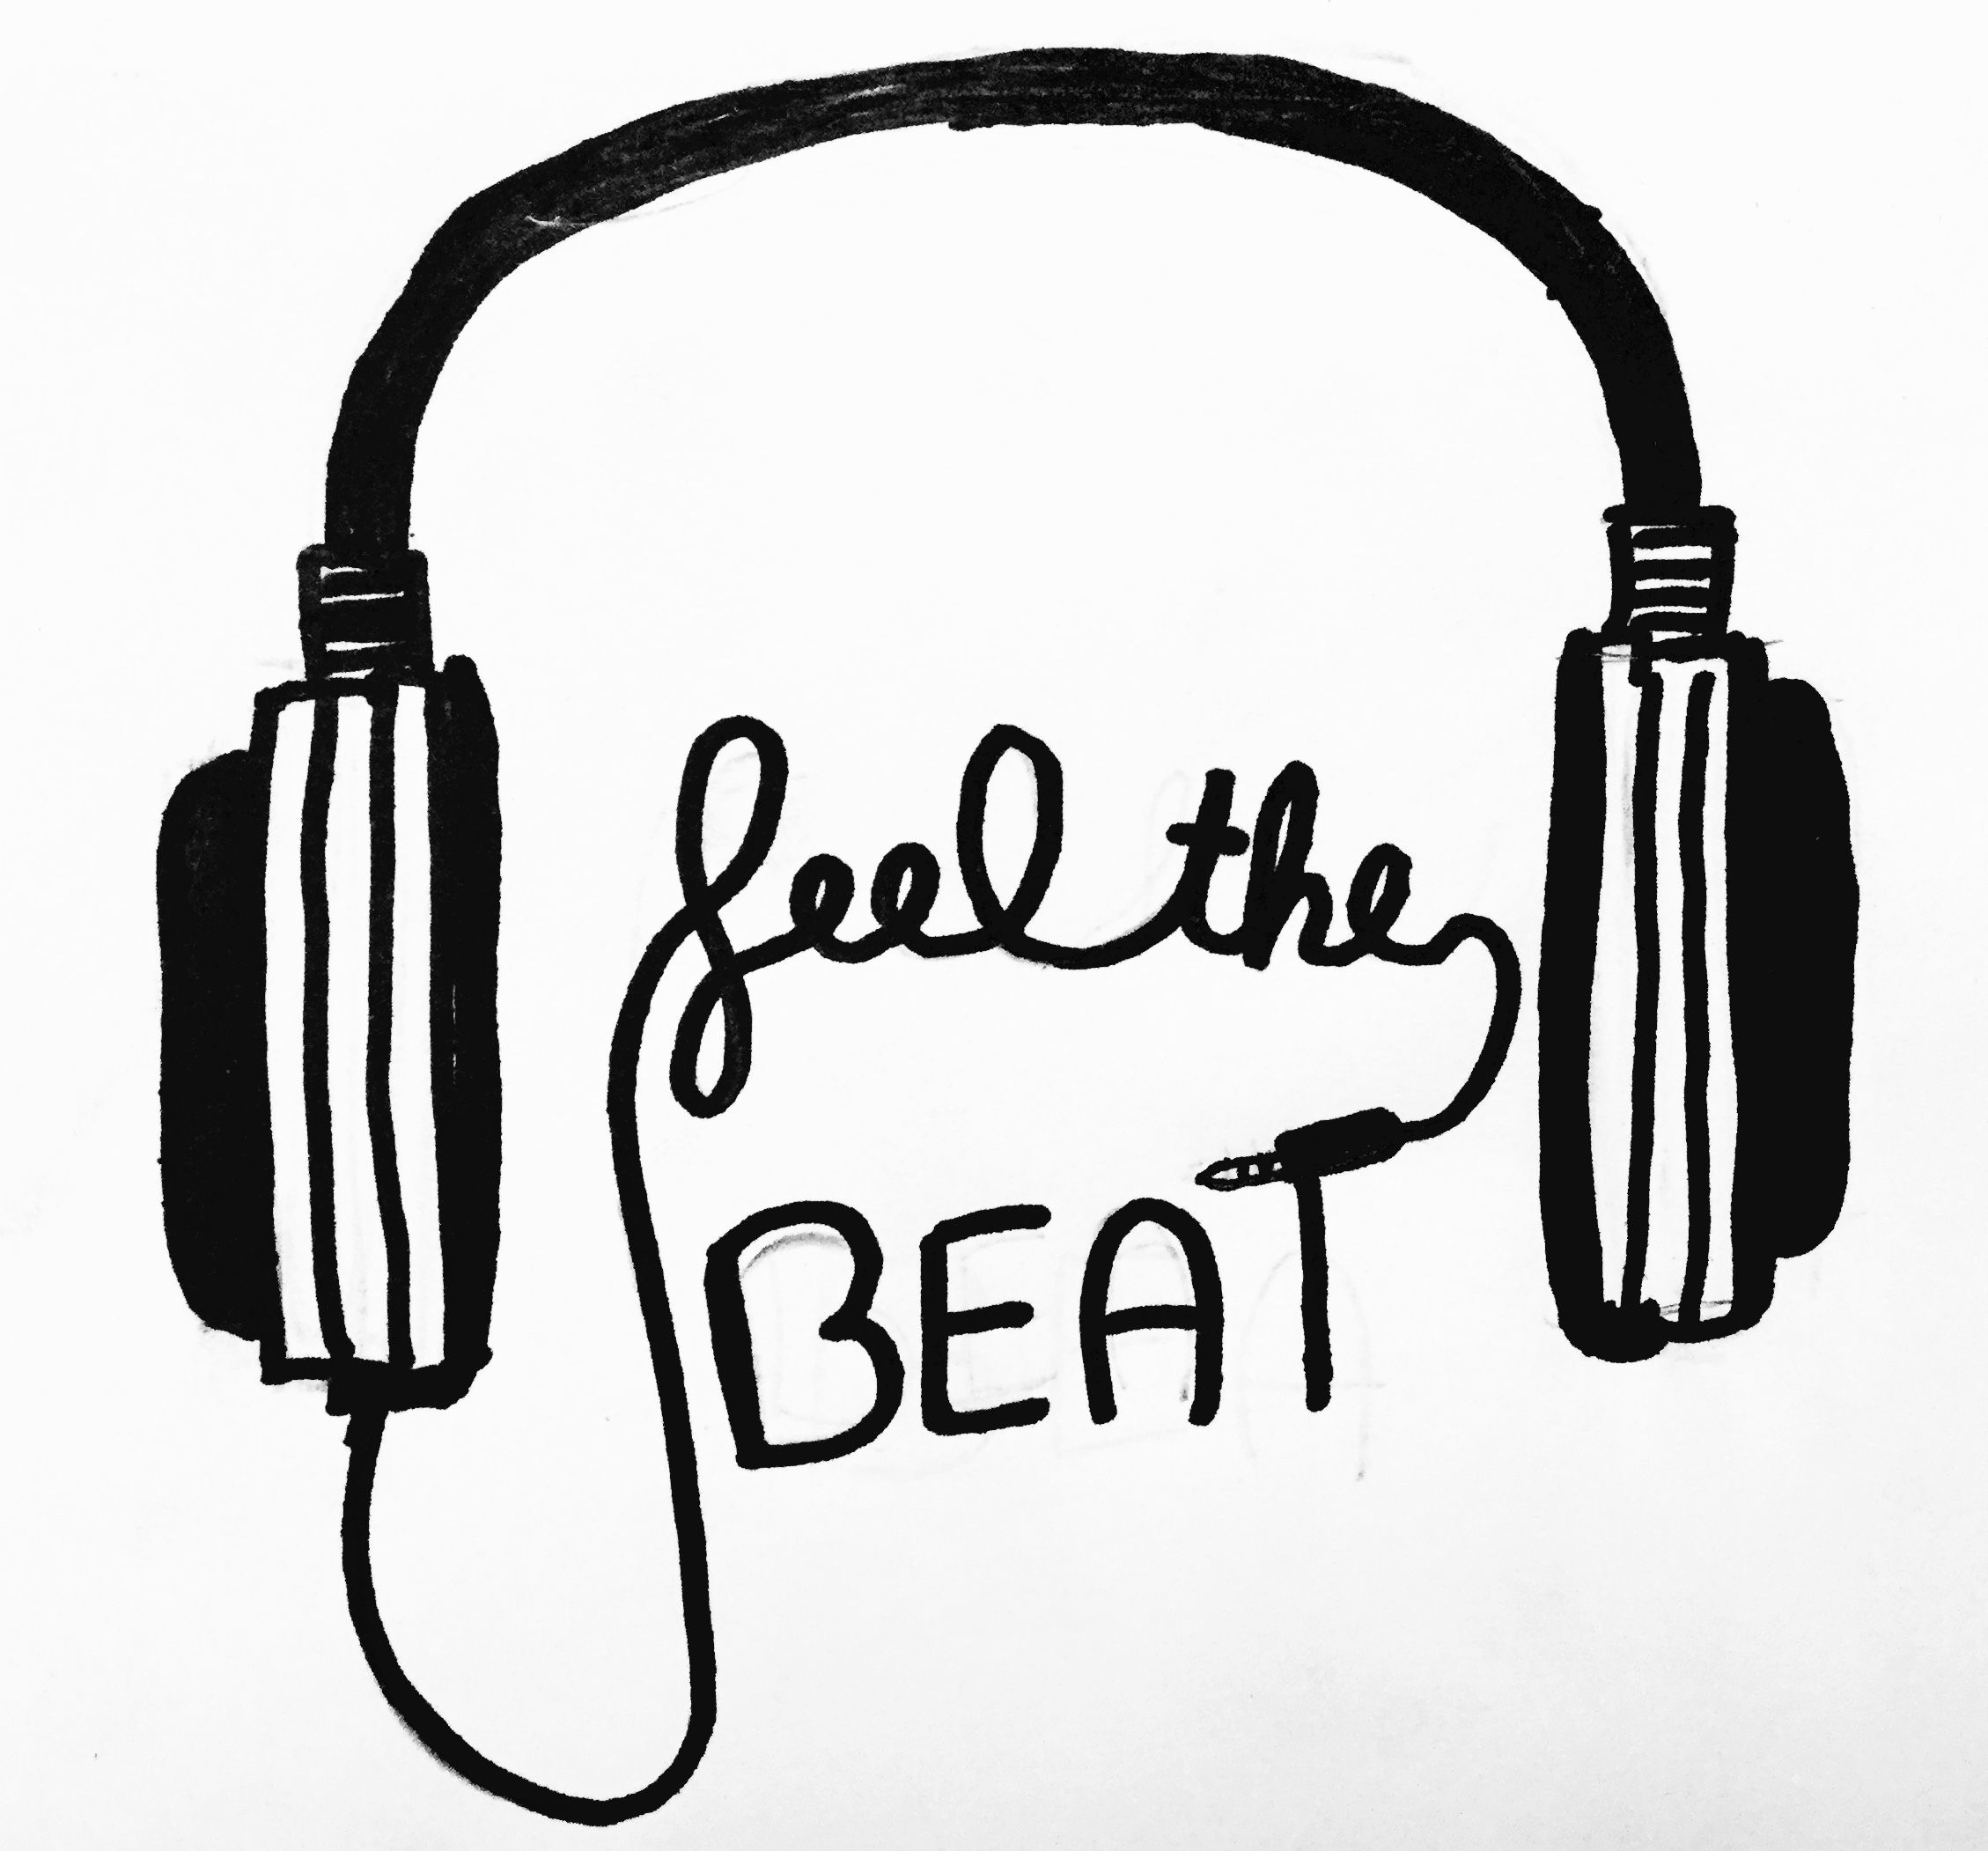 Headphones Drawing | Free download on ClipArtMag